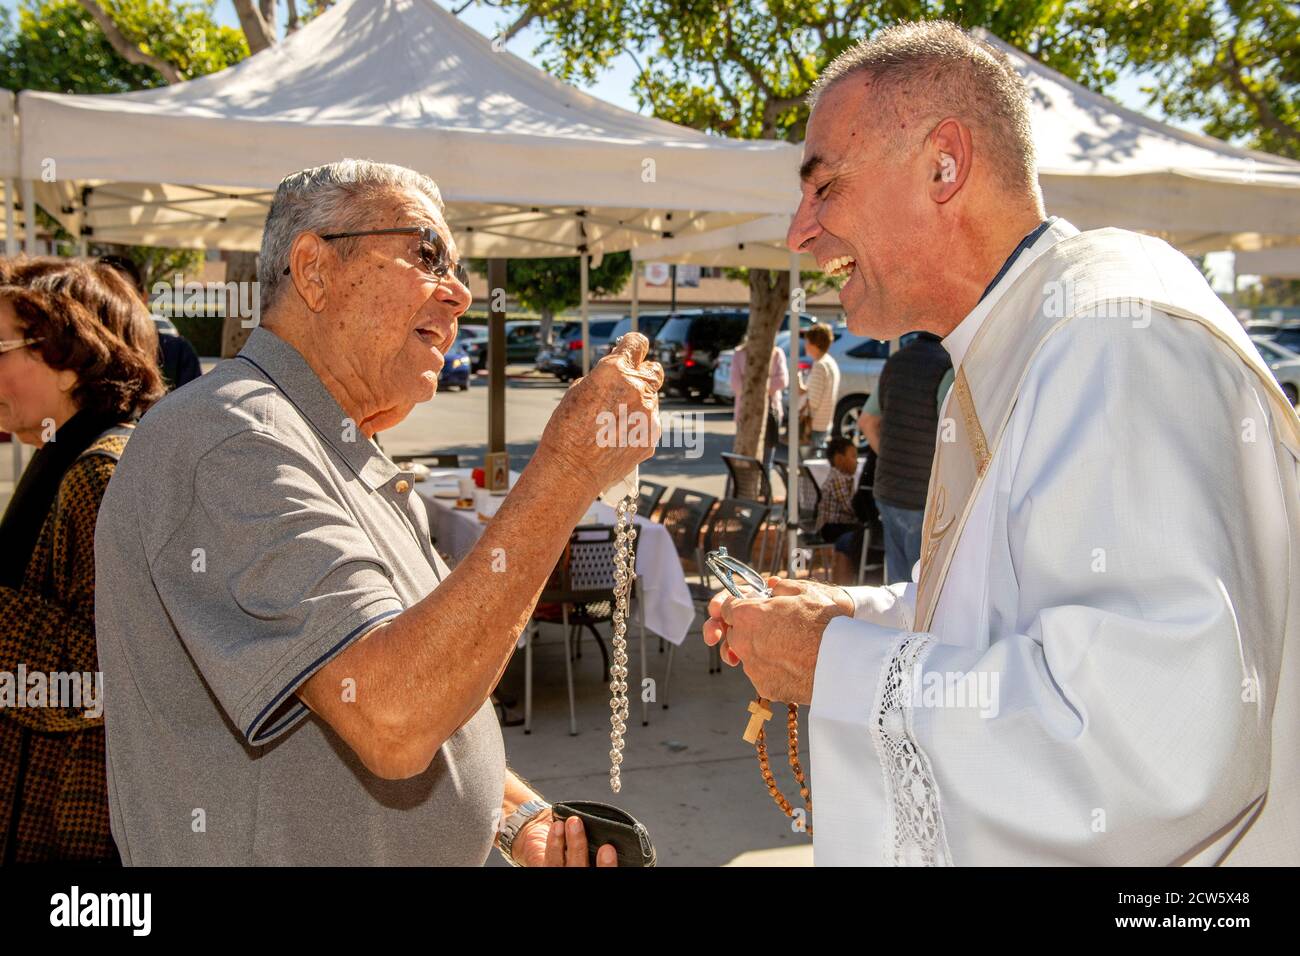 After mass, the deacon of a Southern California Catholic church greets a parishioner who shows him his rosary in the church outdoor yard. Stock Photo